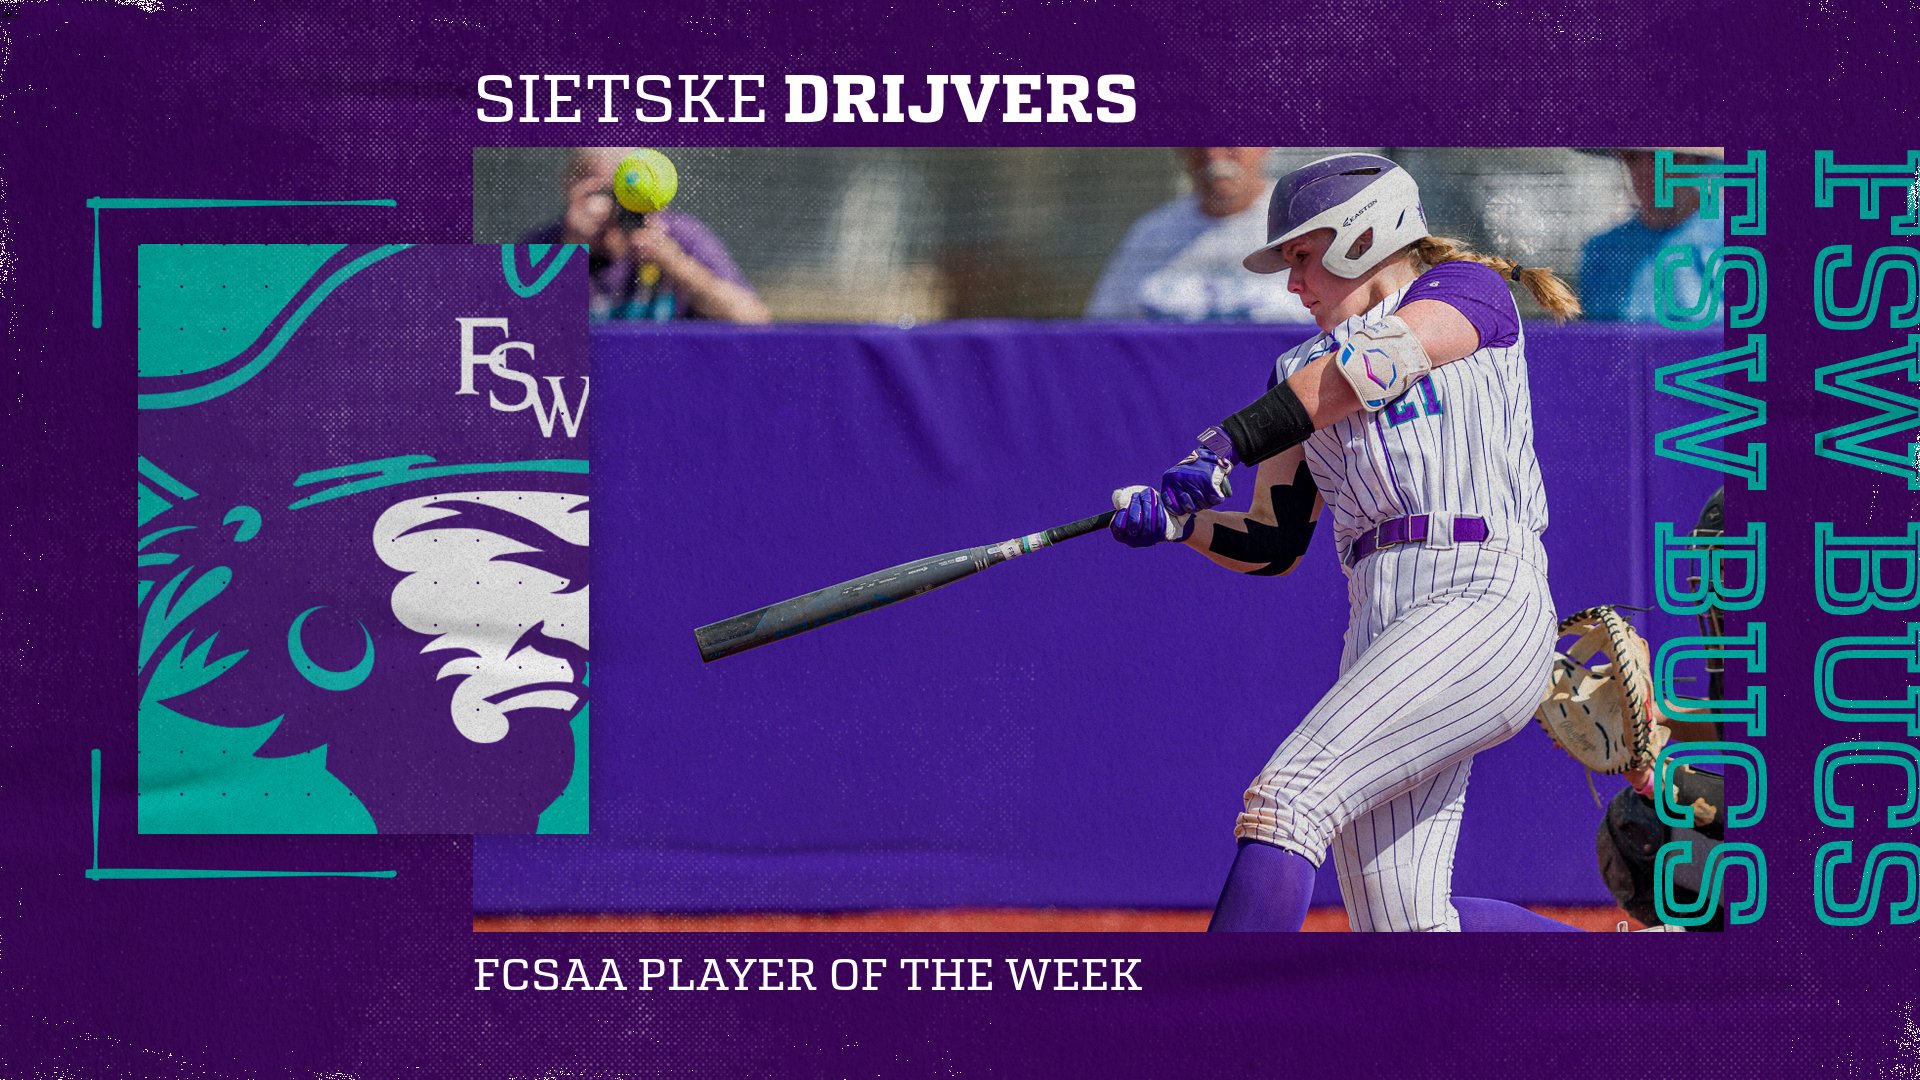 Drijvers Named FCSAA Player of the Week